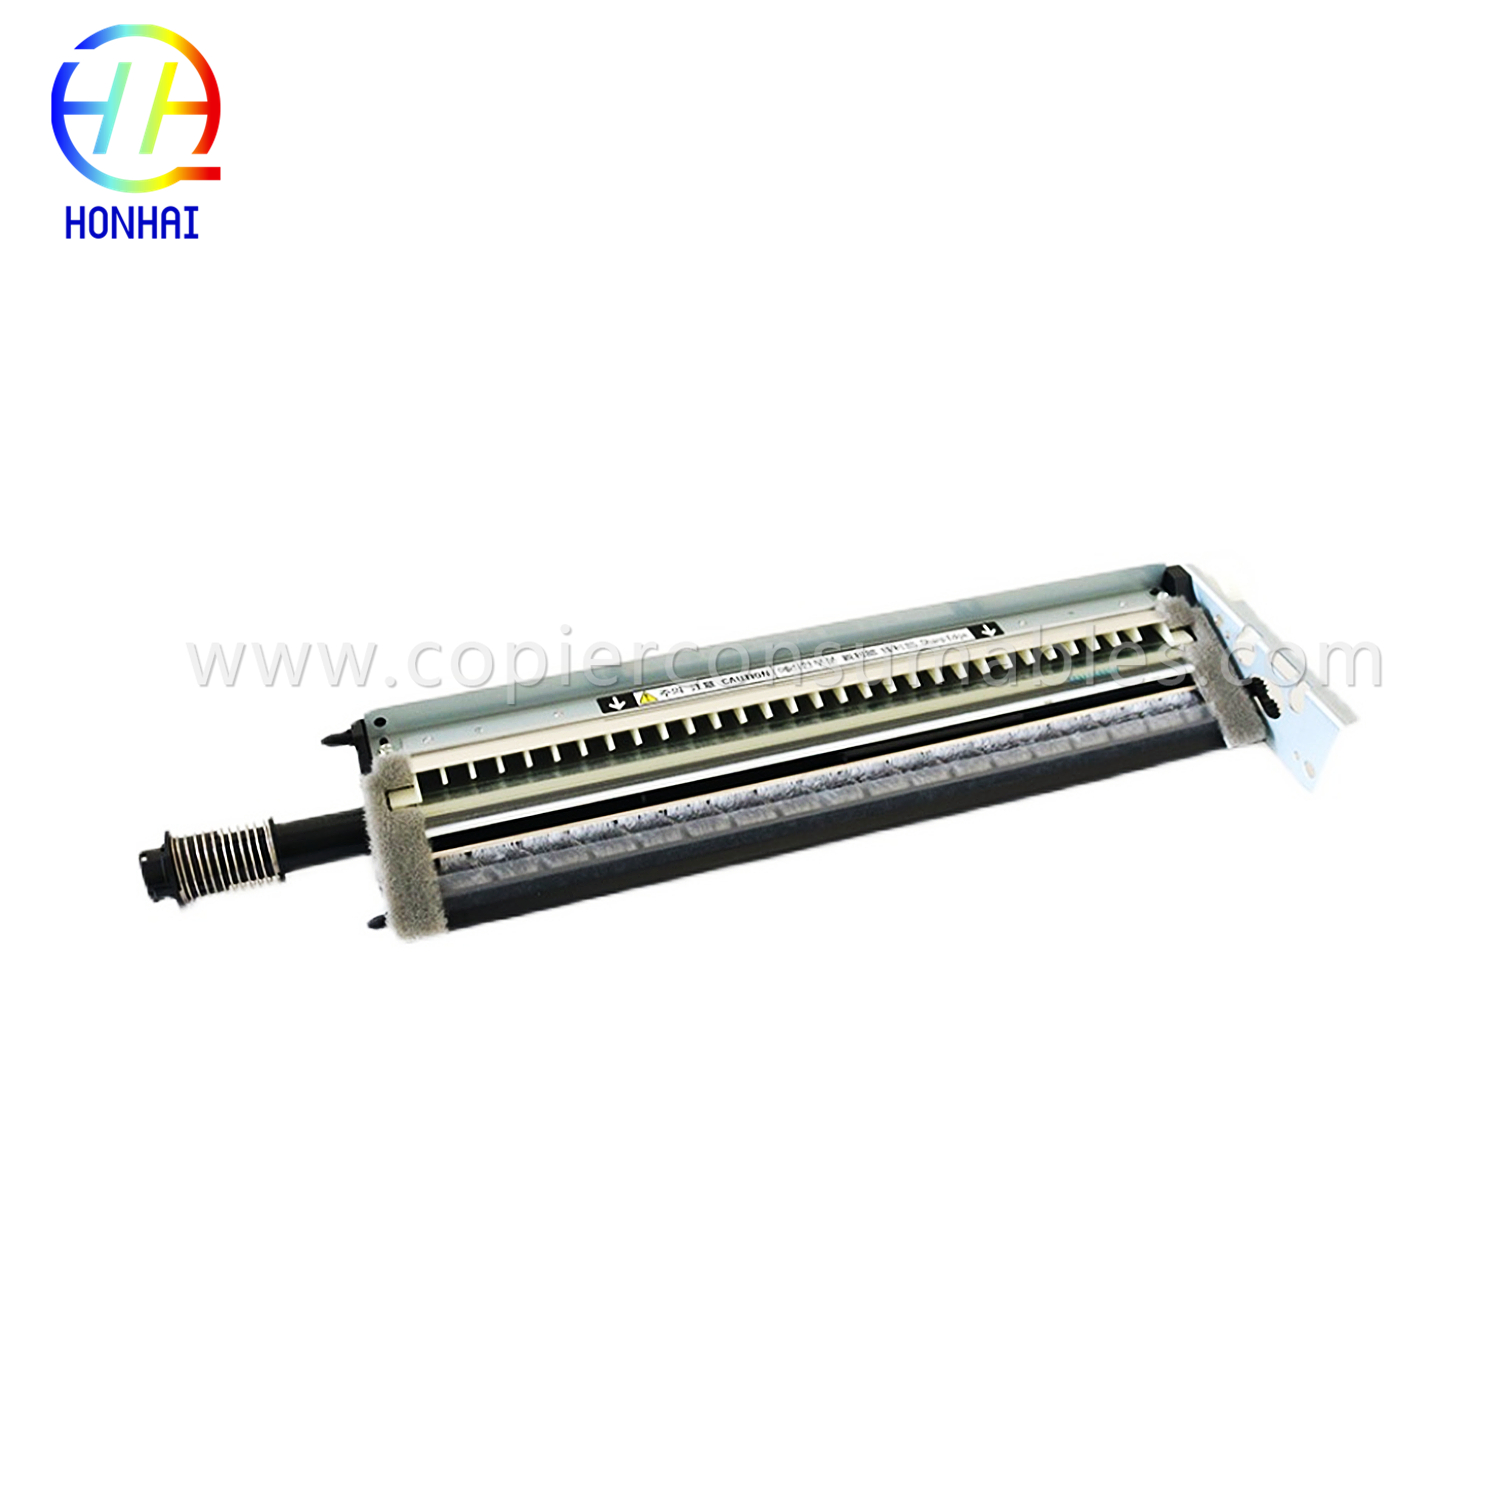 Ibt Cleaner Assembly Xerox 240 250 700 770 (042K94560 042K94561)